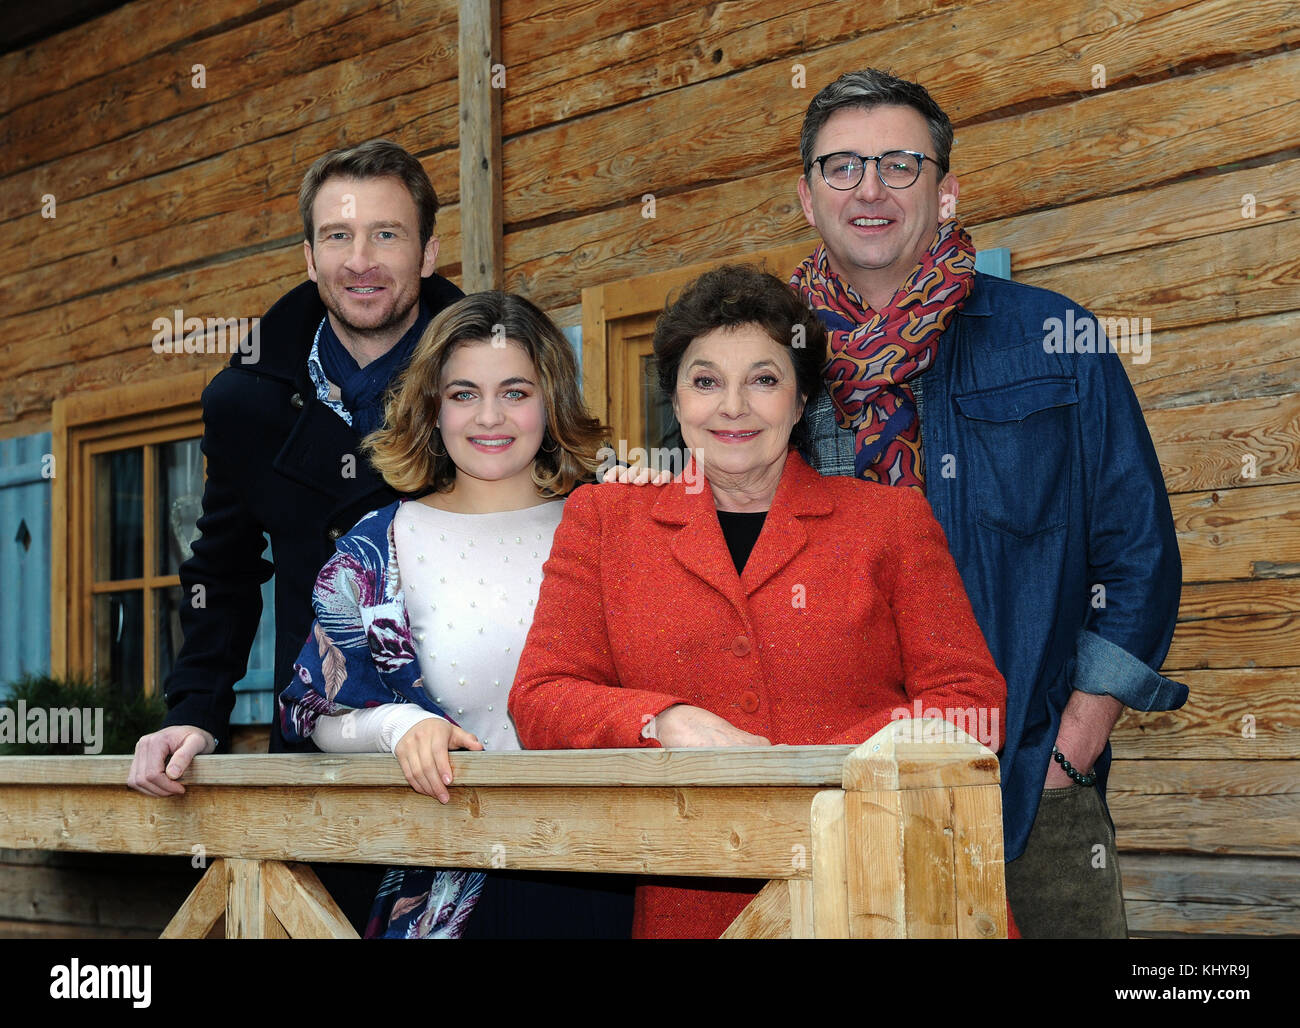 The actors Heiko Ruprecht (L-R), Ronja Forcher, Monika Baumgartner and Hans Sigl smile during the press tour 'Zehn Jahre und 100 Folgen - Der Bergdoktor' (lit. Ten years and 100 episodes - The mountain doctor) at the Leonardo Royal Hotel in Munich, Germany, 21 November 2017. On Thursday, 04 January 2018 at 8.15 pm the German TV channel ZDF will air the 100th episode, a winter special, 'Der Bergdoktor - Höhenangst' (lit. The mountain doctor - vertigo). The following week, beginning of Thursday, 18 January, 8.15 pm, seven further episodes of the series will be shown in German television. The se Stock Photo